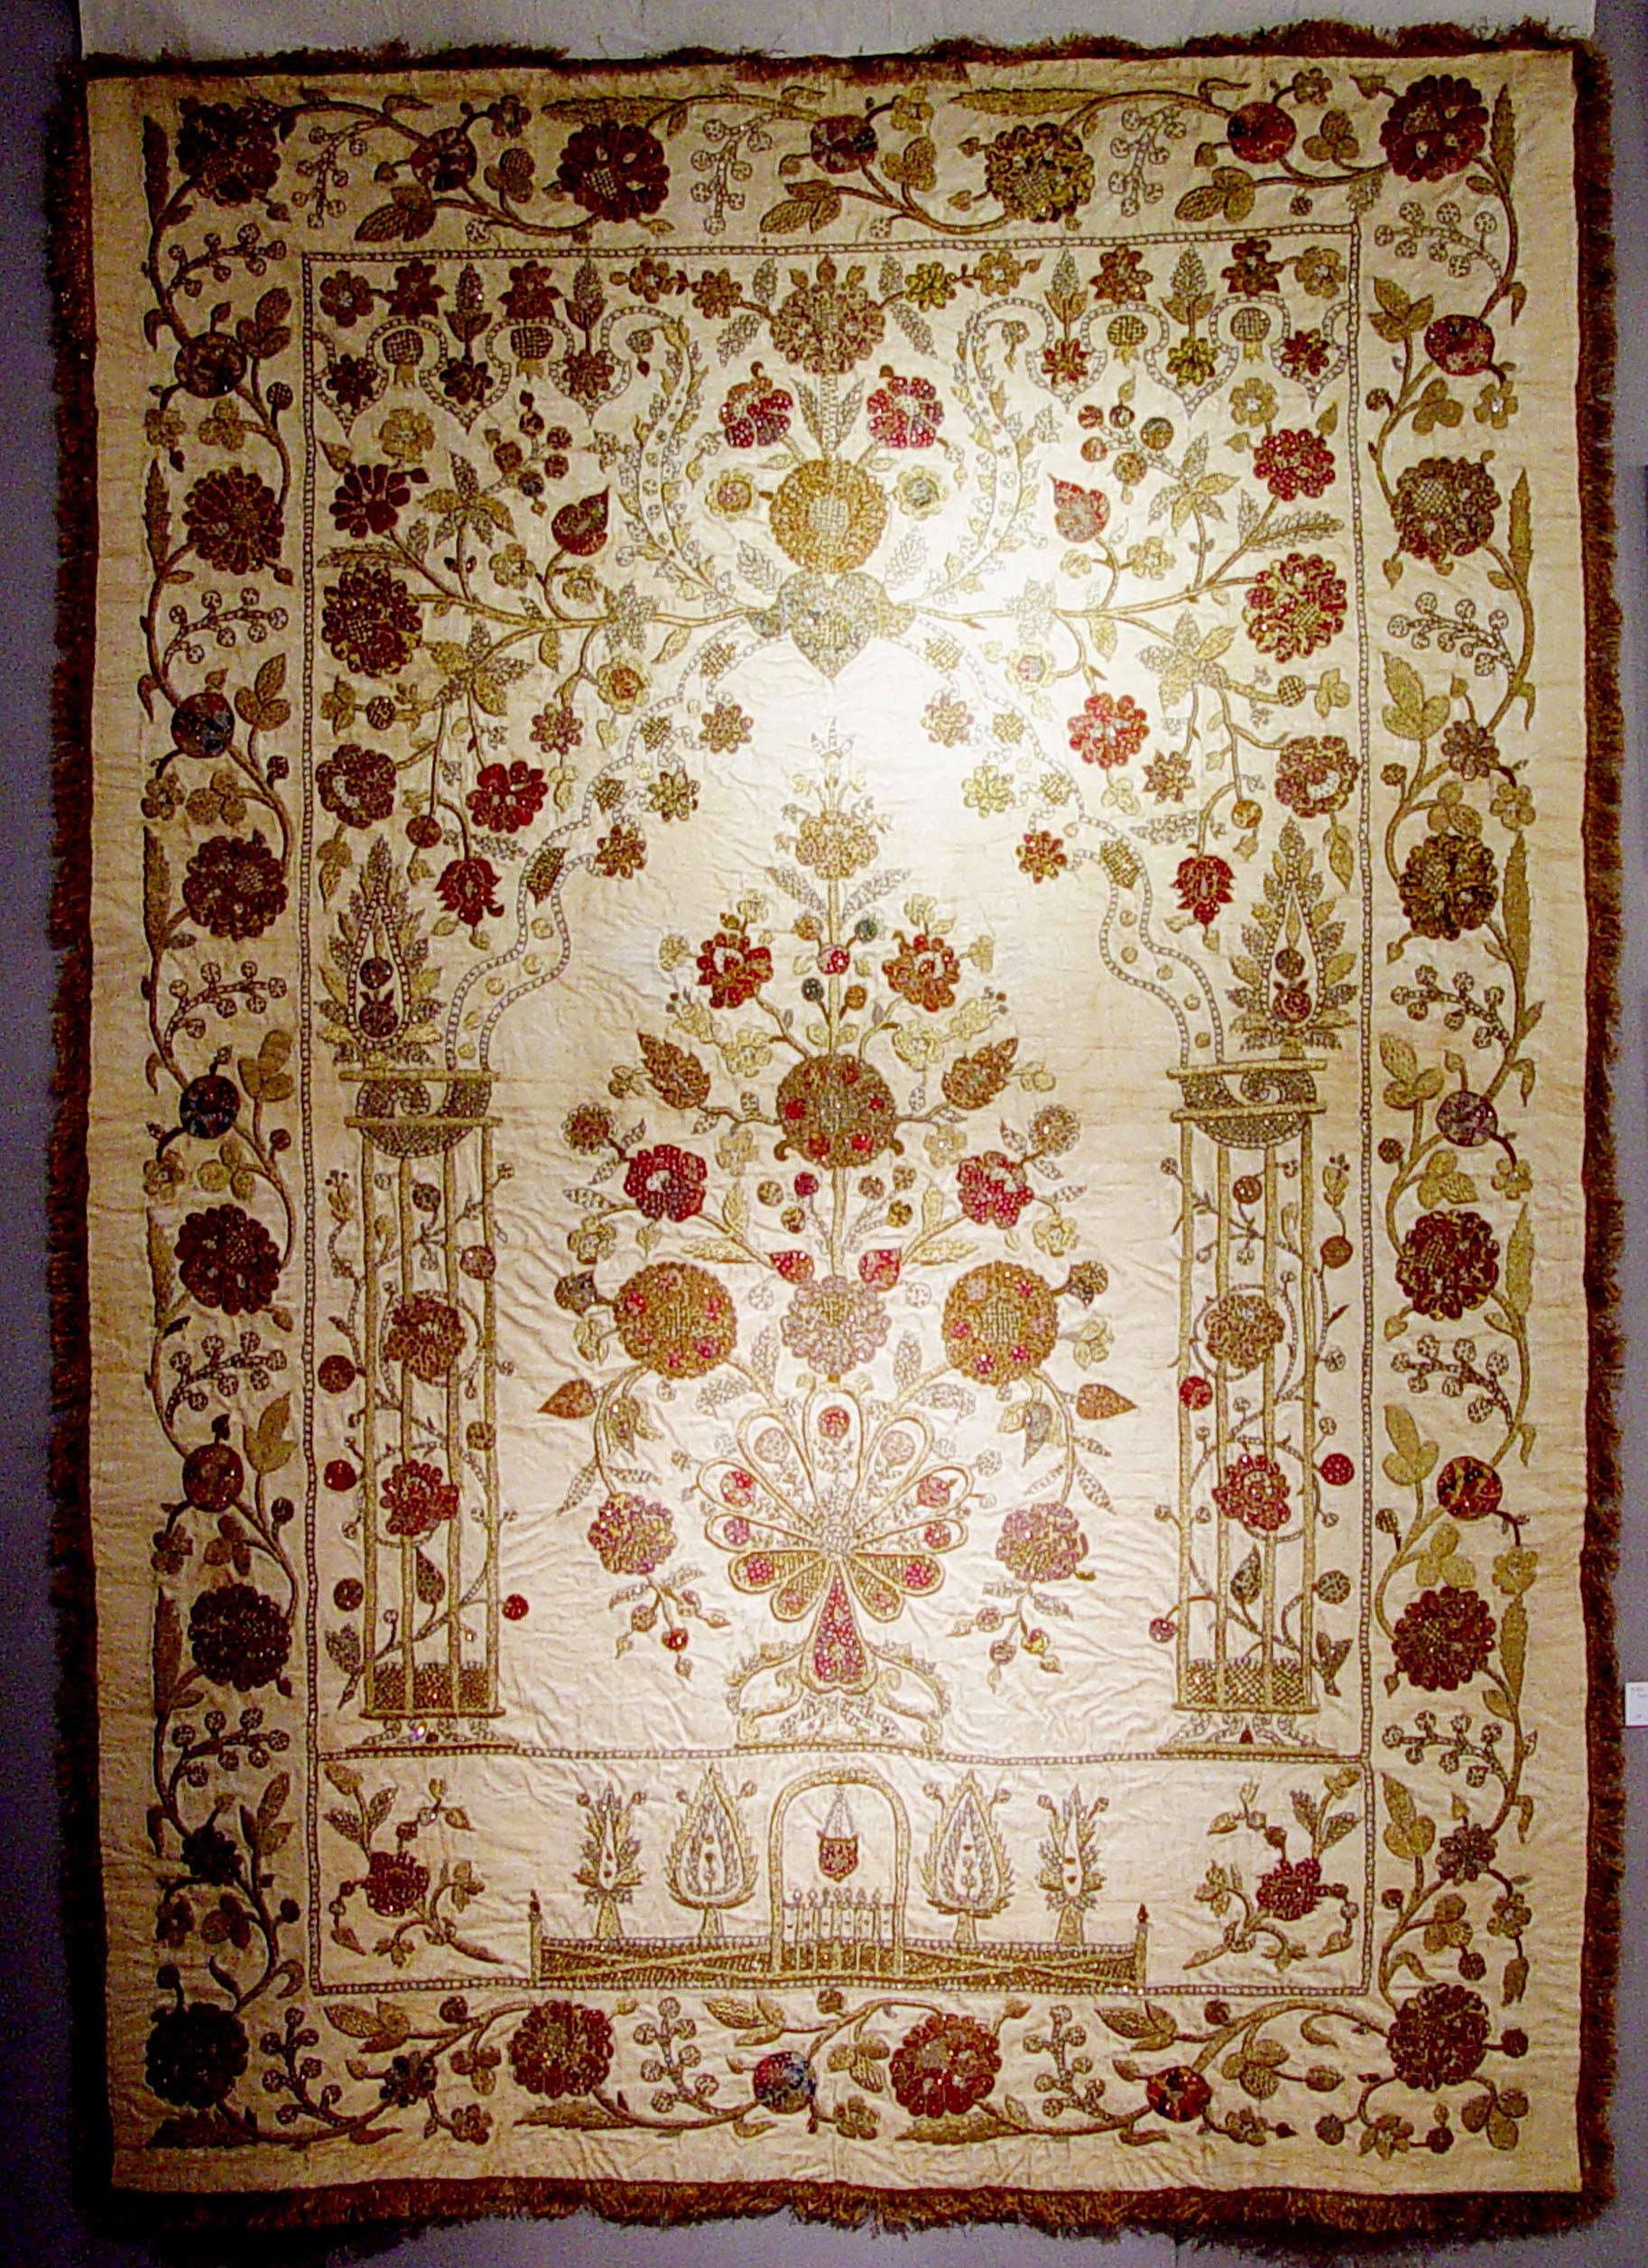 The Ottoman textile has gold embroidery on a beige satin silk background depicting flowers.

The massive silk work depicts the garden-like setting of heaven described in the Qur'an. It depicts an arched gateway, the gate to Paradise, in the center